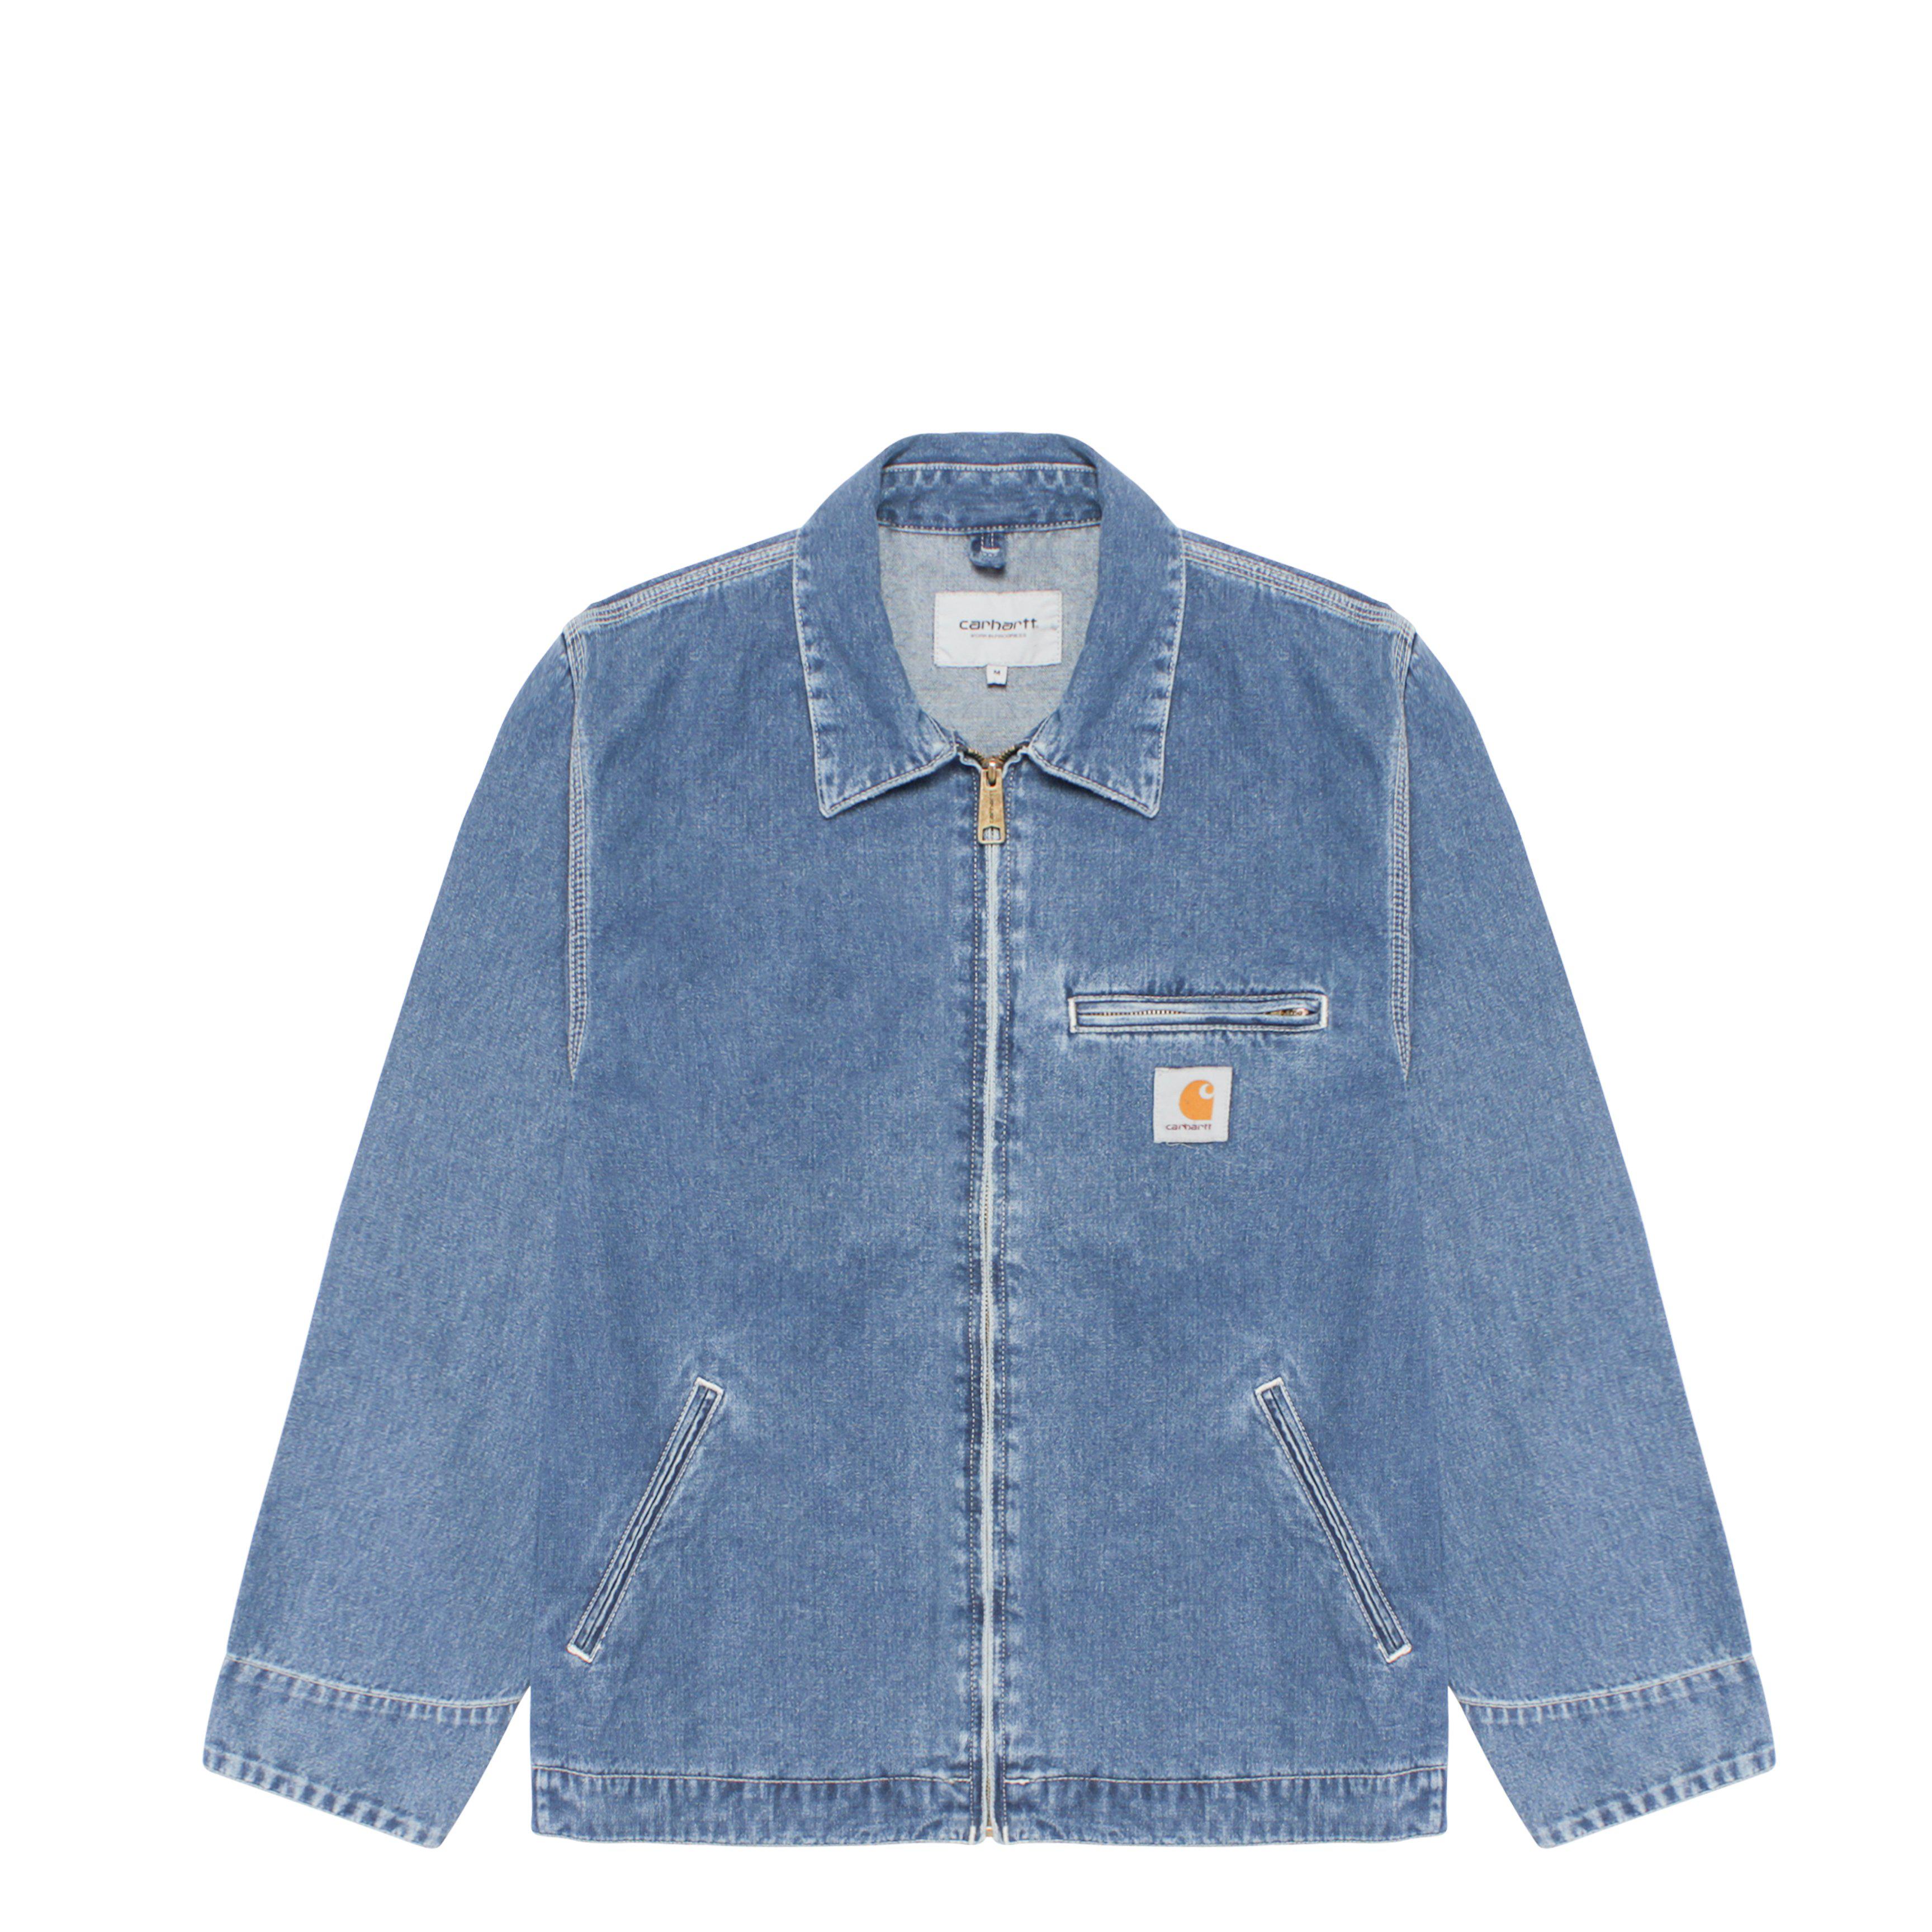 Carhartt WIP Detroit Jacket in Blue Stone Washed (Blue) for Men - Lyst